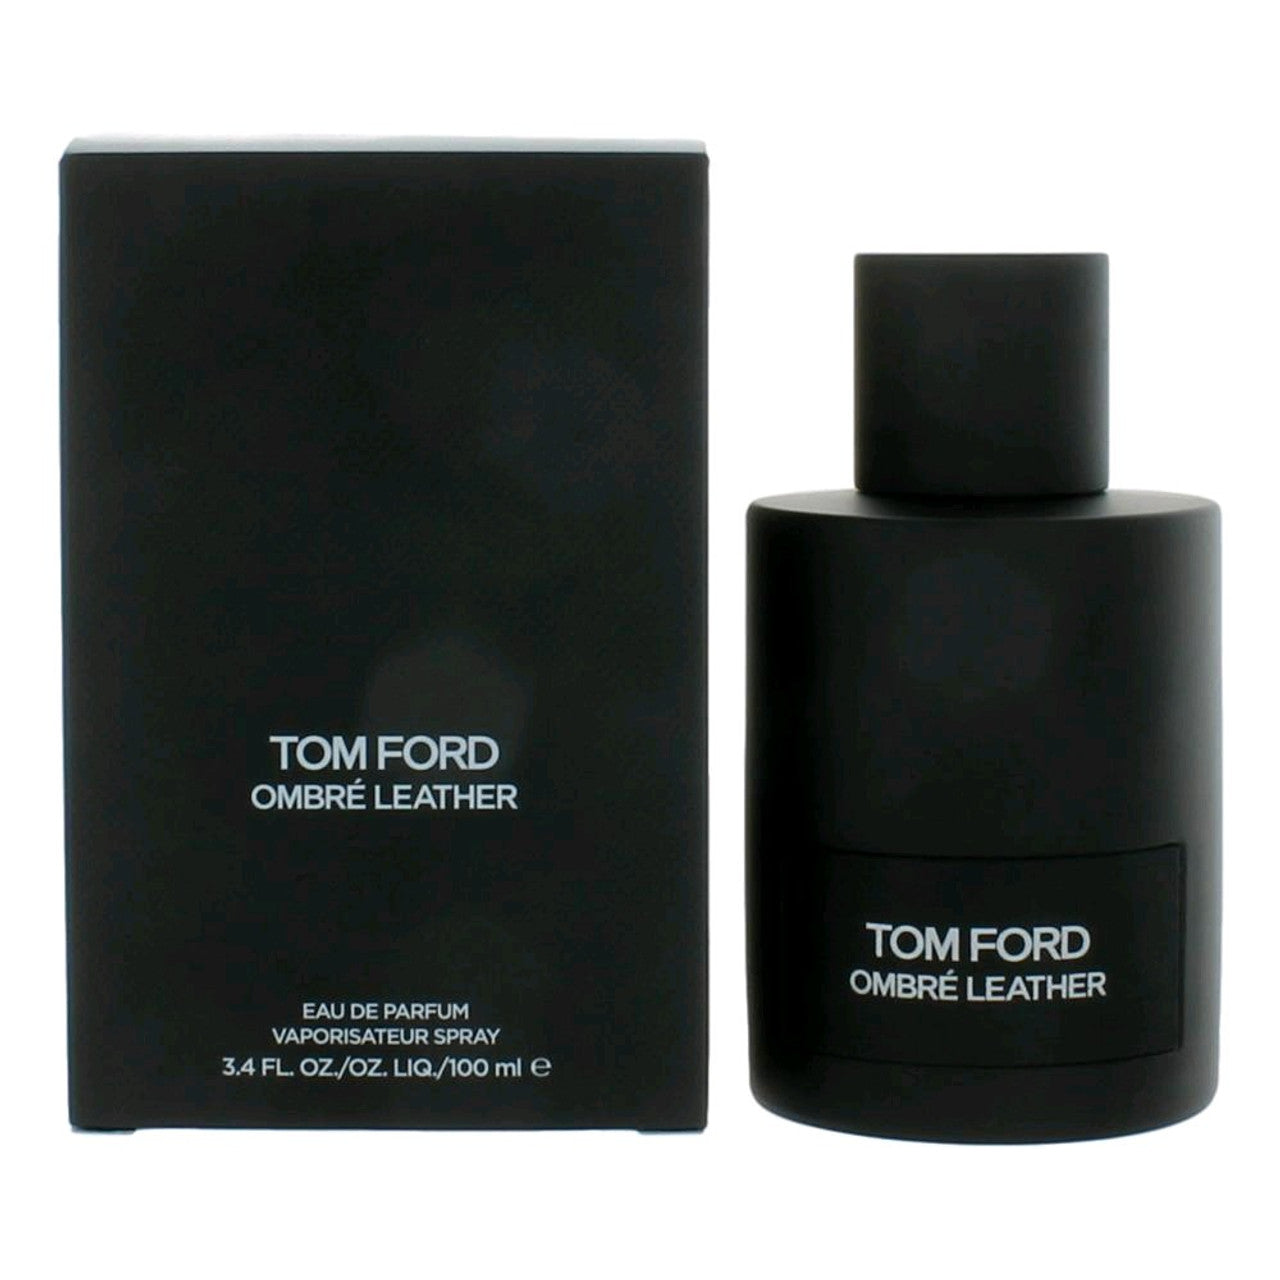 3.4 oz bottle of Tom Ford Ombre Leather